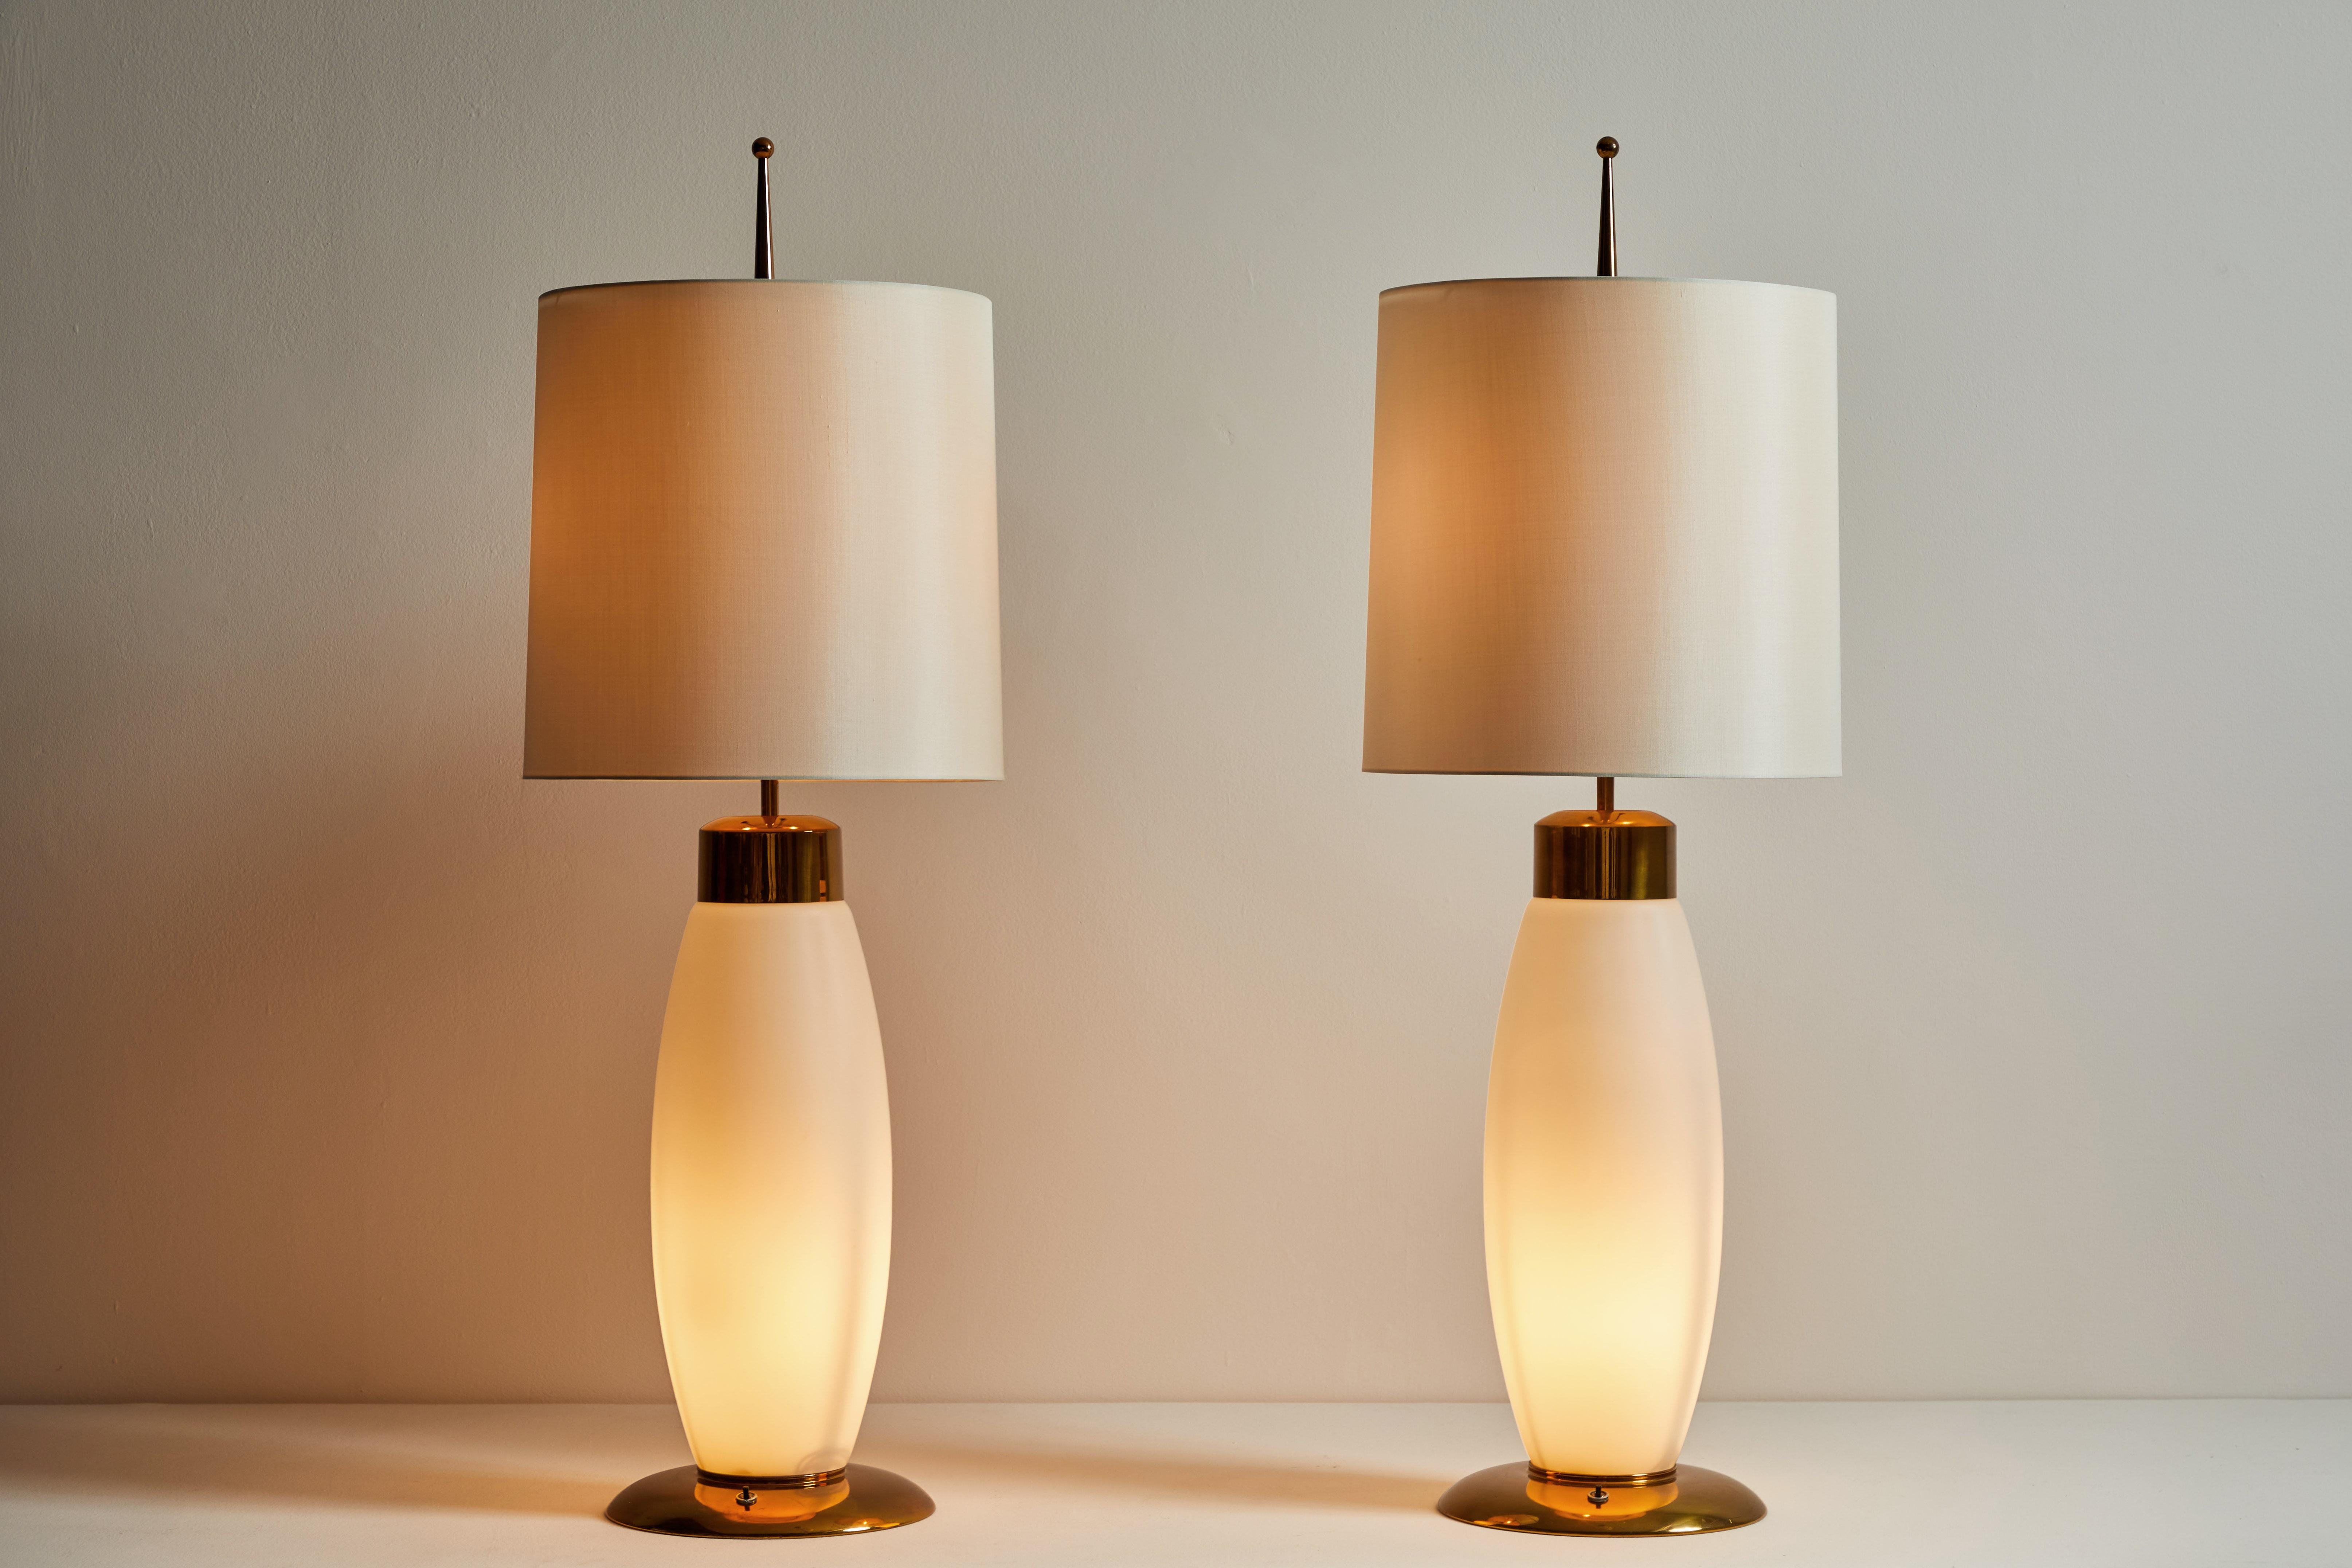 Pair of table lamps by Stilnovo. Manufactured in Italy, circa 1960s. Opaline glass, brass, custom silk shades. Wired for U.S standards. We recommend 3 E26 40w maximum bulbs per fixture. Bulbs provided as a onetime courtesy. Retains original